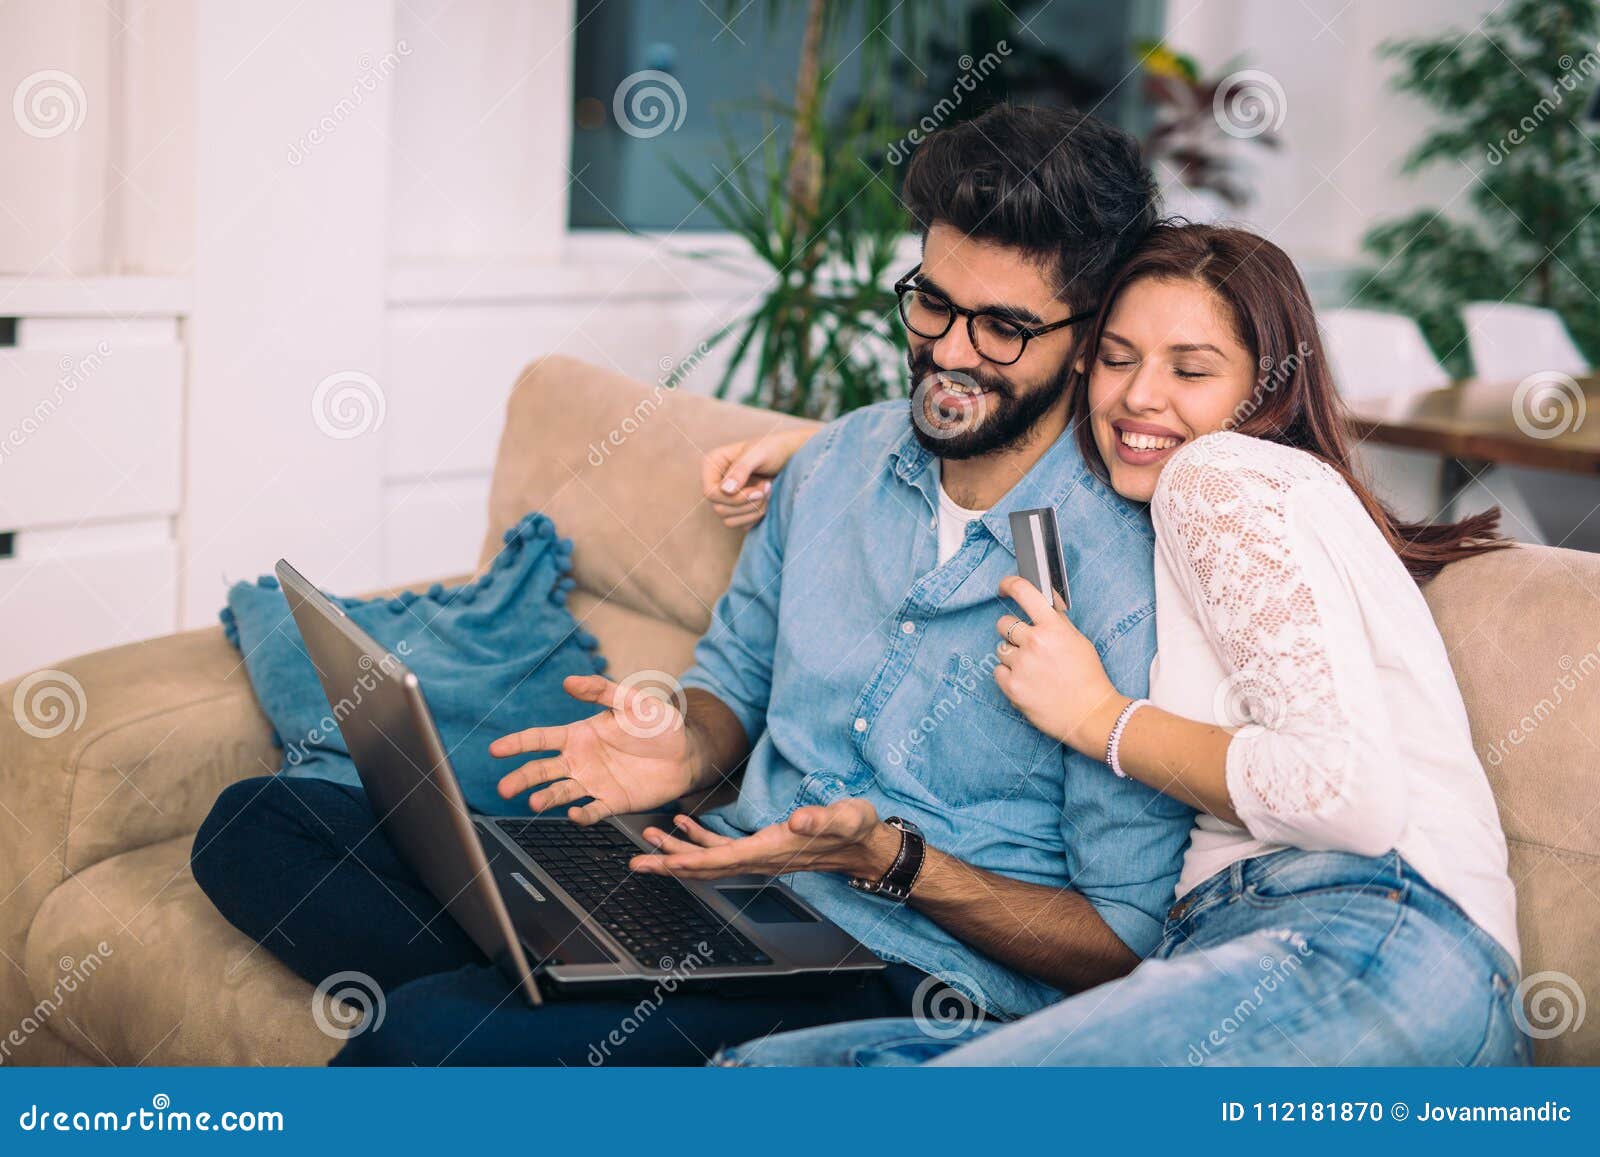 Man Using Laptop And Woman Holding Credit Card. Stock ...